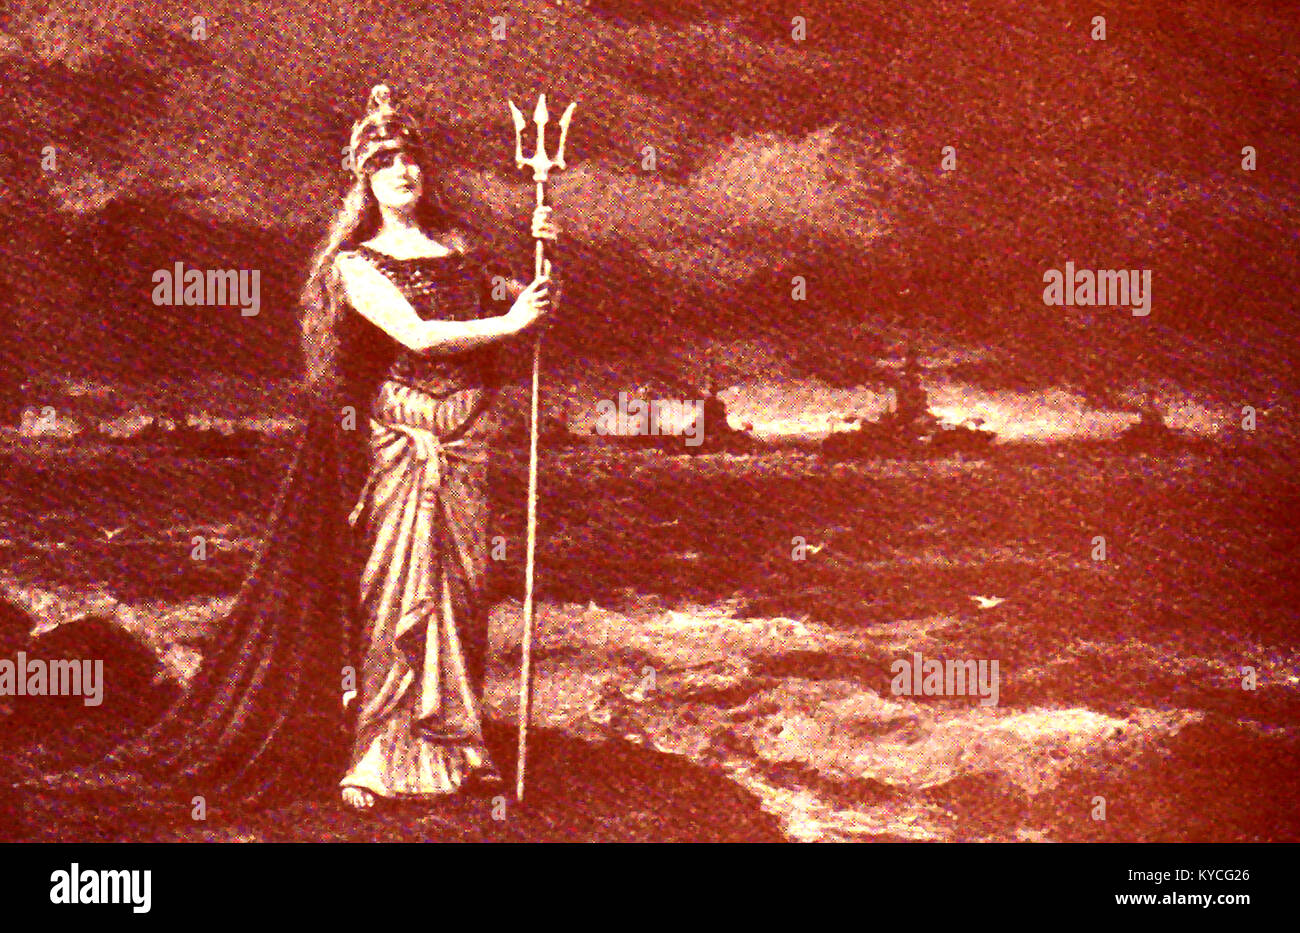 Britannia Rules the Waves - A World War One depiction of the mythical  patriotic figure Britannia, a cultural icon, with British war ships in the background Stock Photo